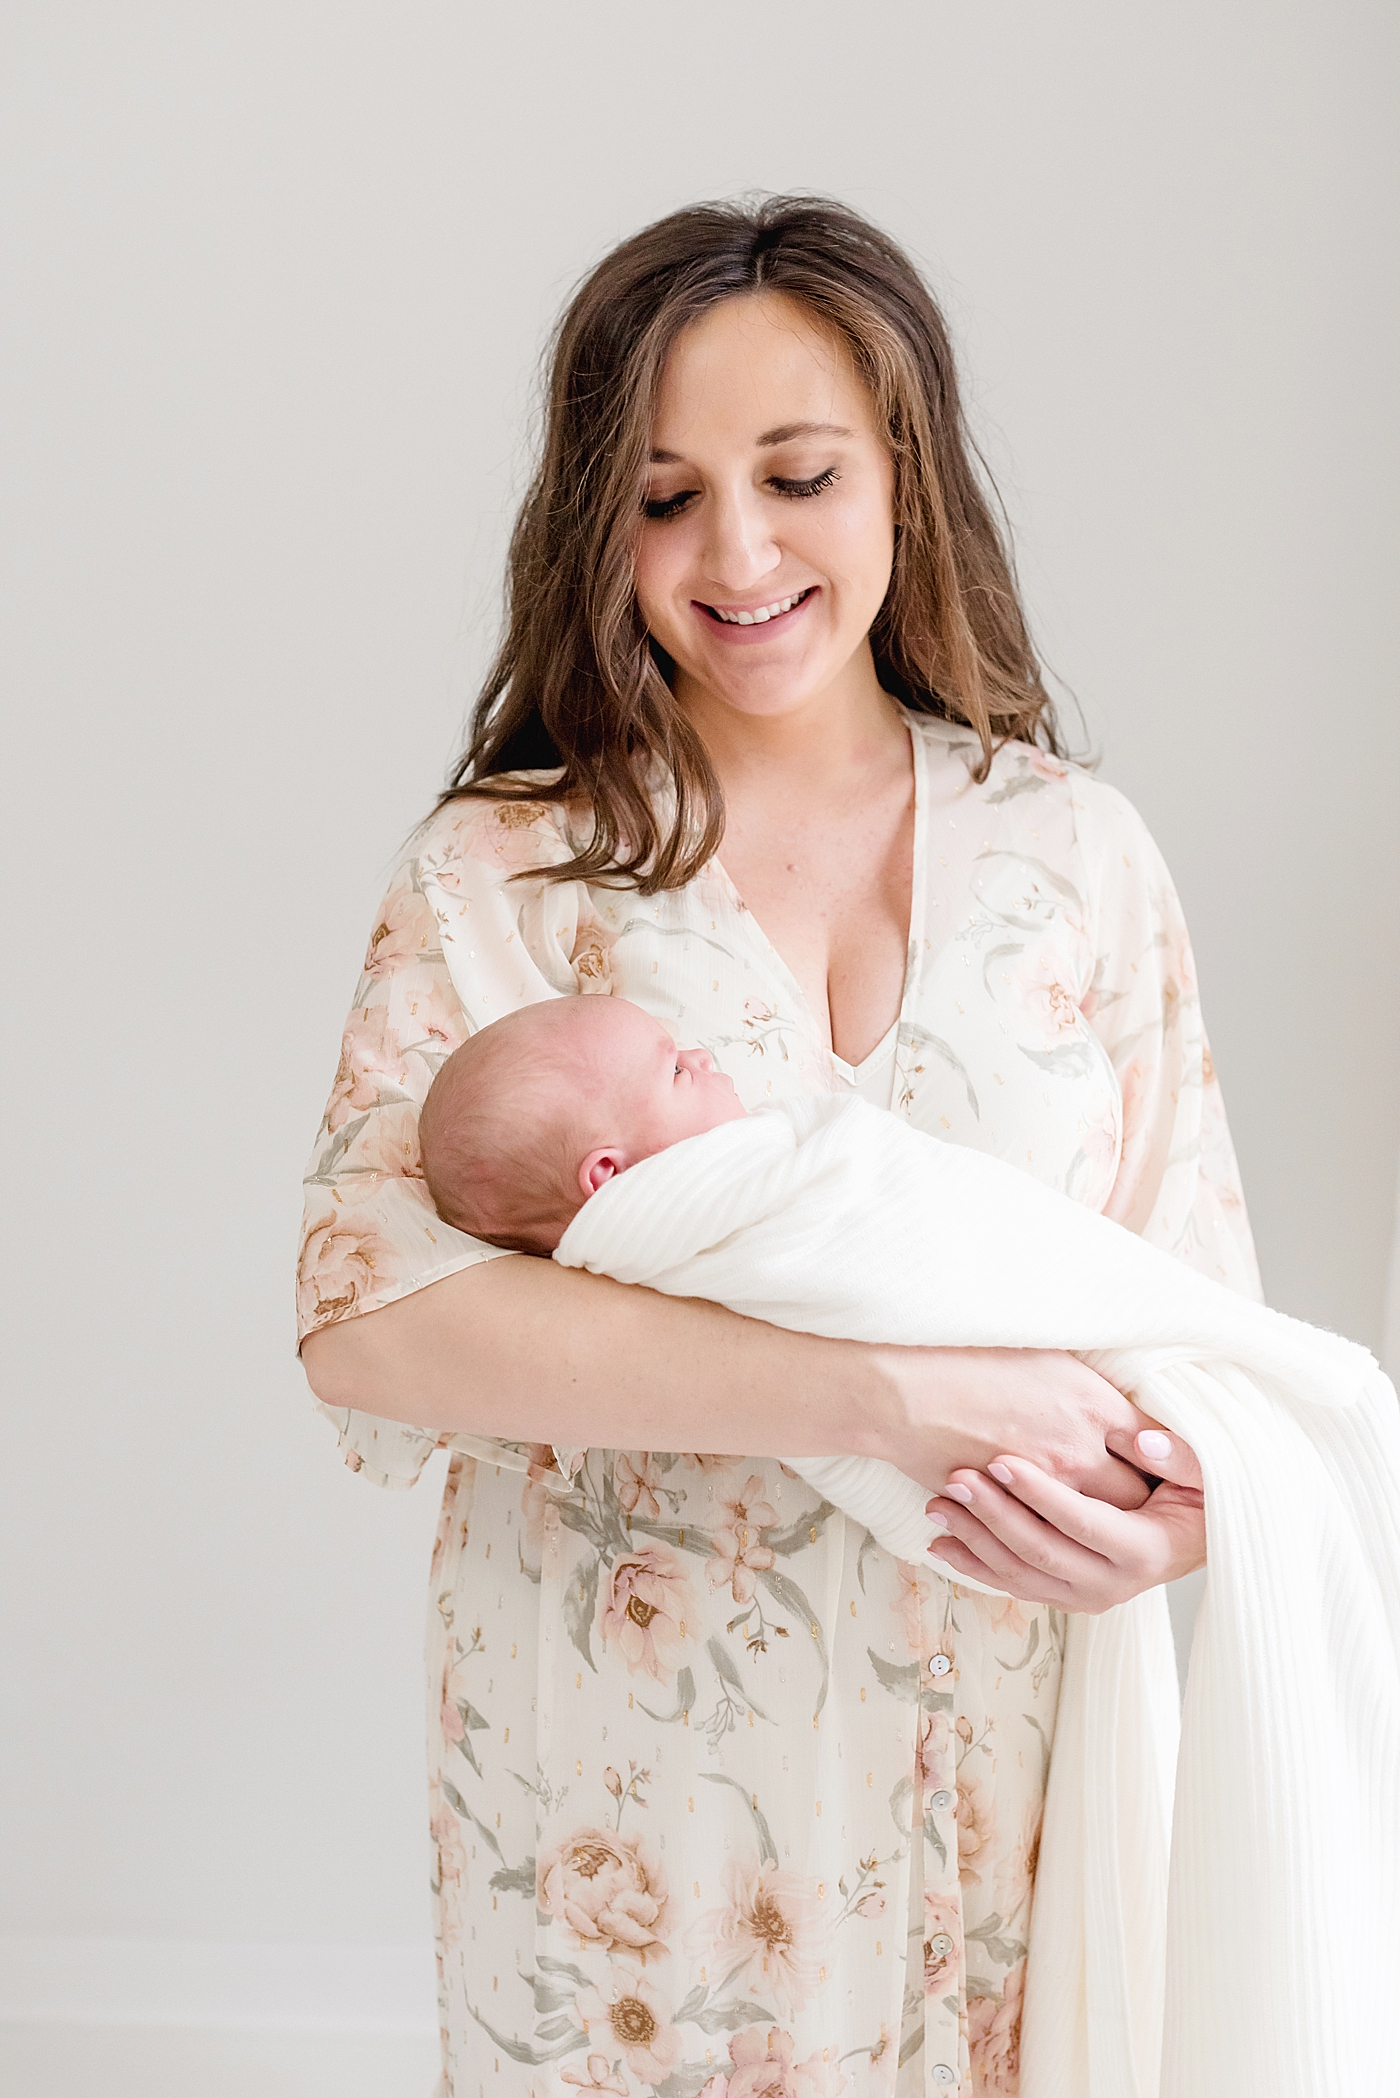 New mom in floral print dress smiling down at newborn baby | Photo by Anna Wisjo Photography